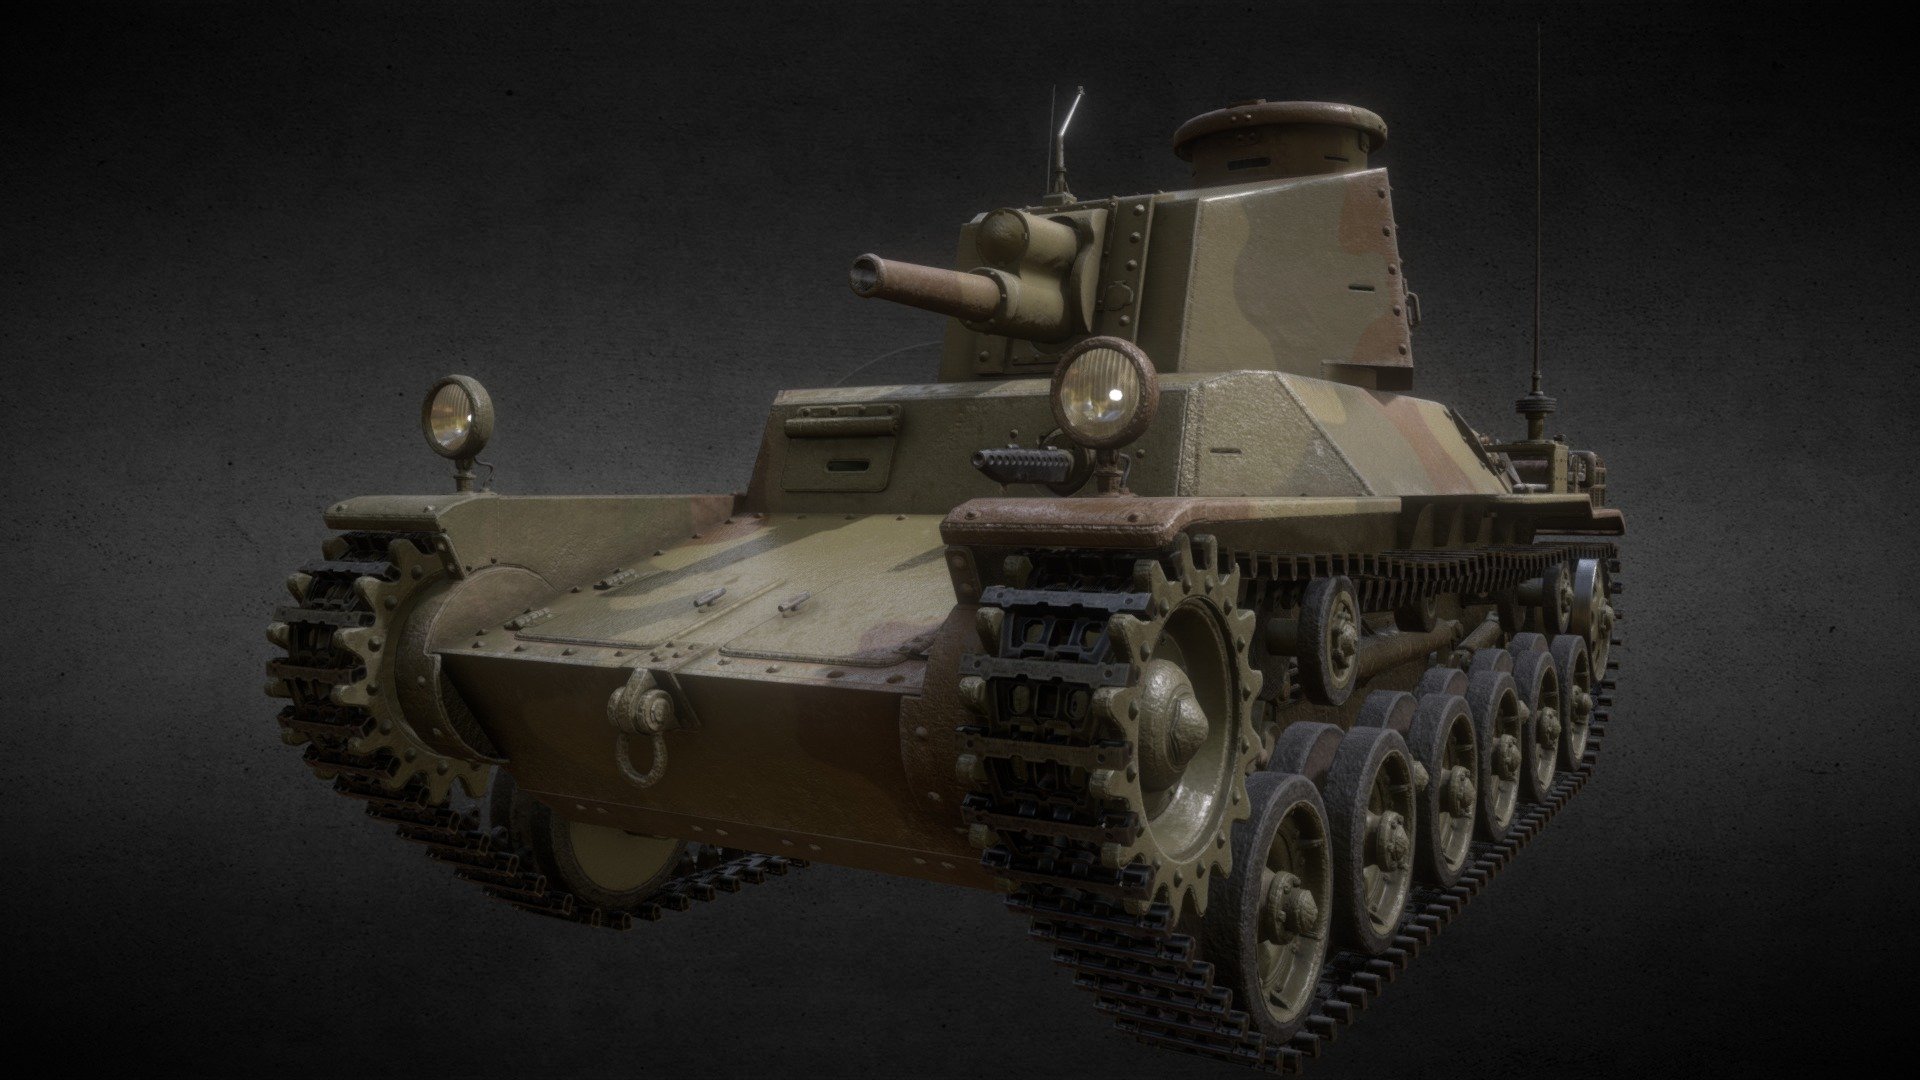 Note: this is a V.2 version of this model.

Ready to use Type 2 Ho-I 3d model

Type 2 Ho-I was based on a chassis and hull of the Type 1 Chi-He medium tank (3D model also available).
It was designed as a self-propelled howitzer and was meant to provide close fire support for standard Japanese medium tanks with additional ability to destroy enemy anti-tank fortifications.

Camouglage paint variant.

Ready to use in games or renders.

More Japanese WW II models in the collection: https://skfb.ly/oyoDN

More Tanks and Parts models in the collection: https://skfb.ly/oyoDV

More cheap or free military models in the collection: https://skfb.ly/ooYNo

texture sets:




8K for hull

8K for turret

8K for chassis

1K for tracks
 - Type 2 Ho-I (IJA Gun Tank) V.2 - Buy Royalty Free 3D model by AdamKozakGrafika 3d model